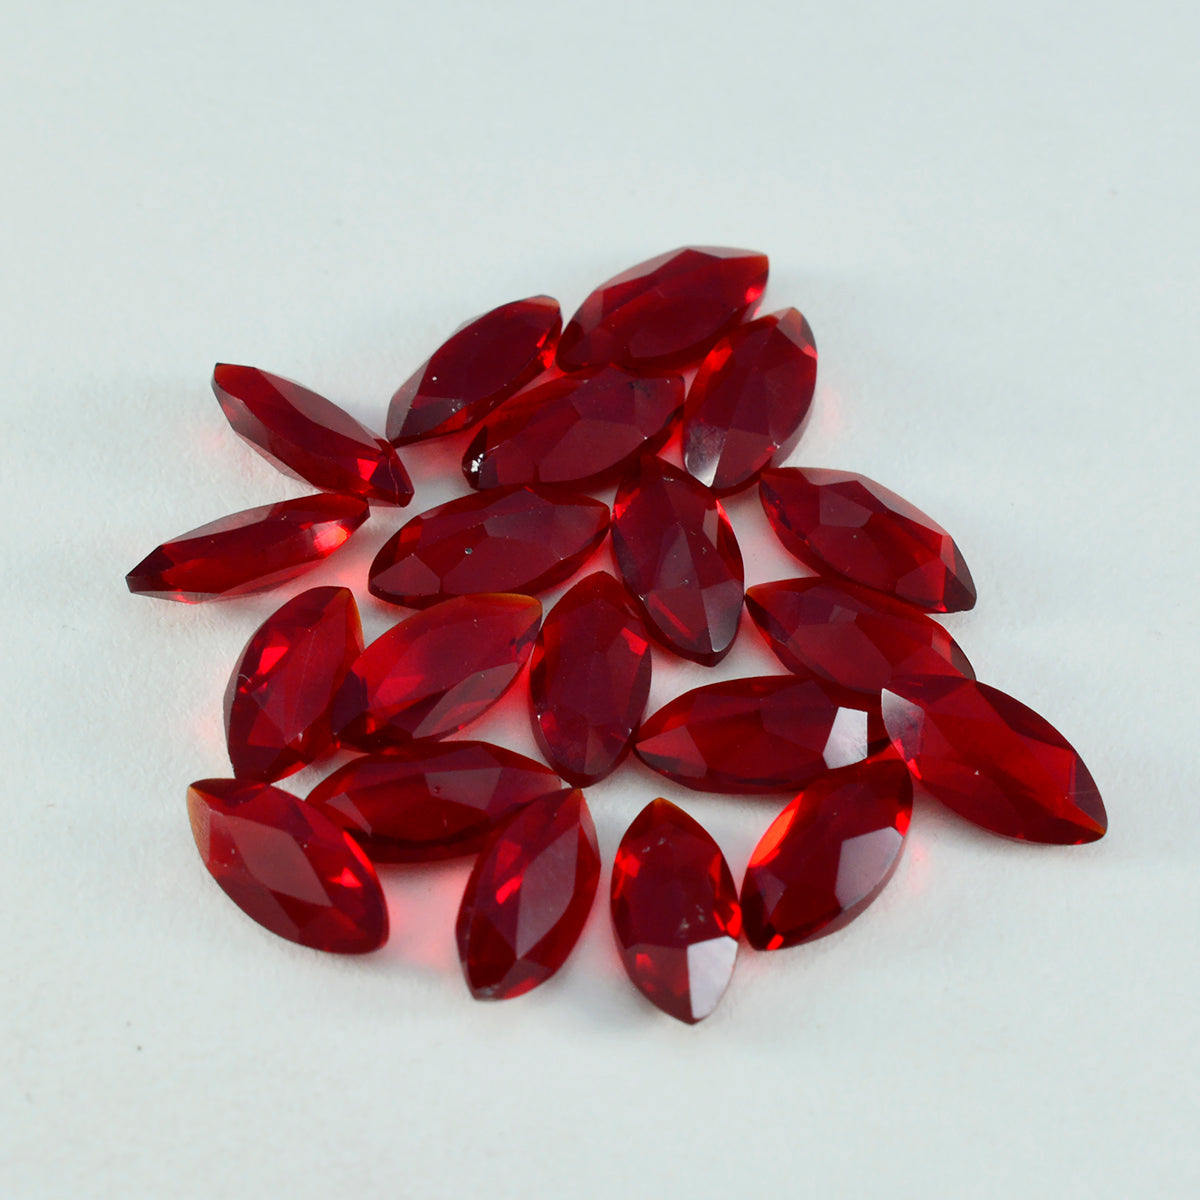 Riyogems 1PC Red Ruby CZ Faceted 7x14 mm Marquise Shape attractive Quality Stone